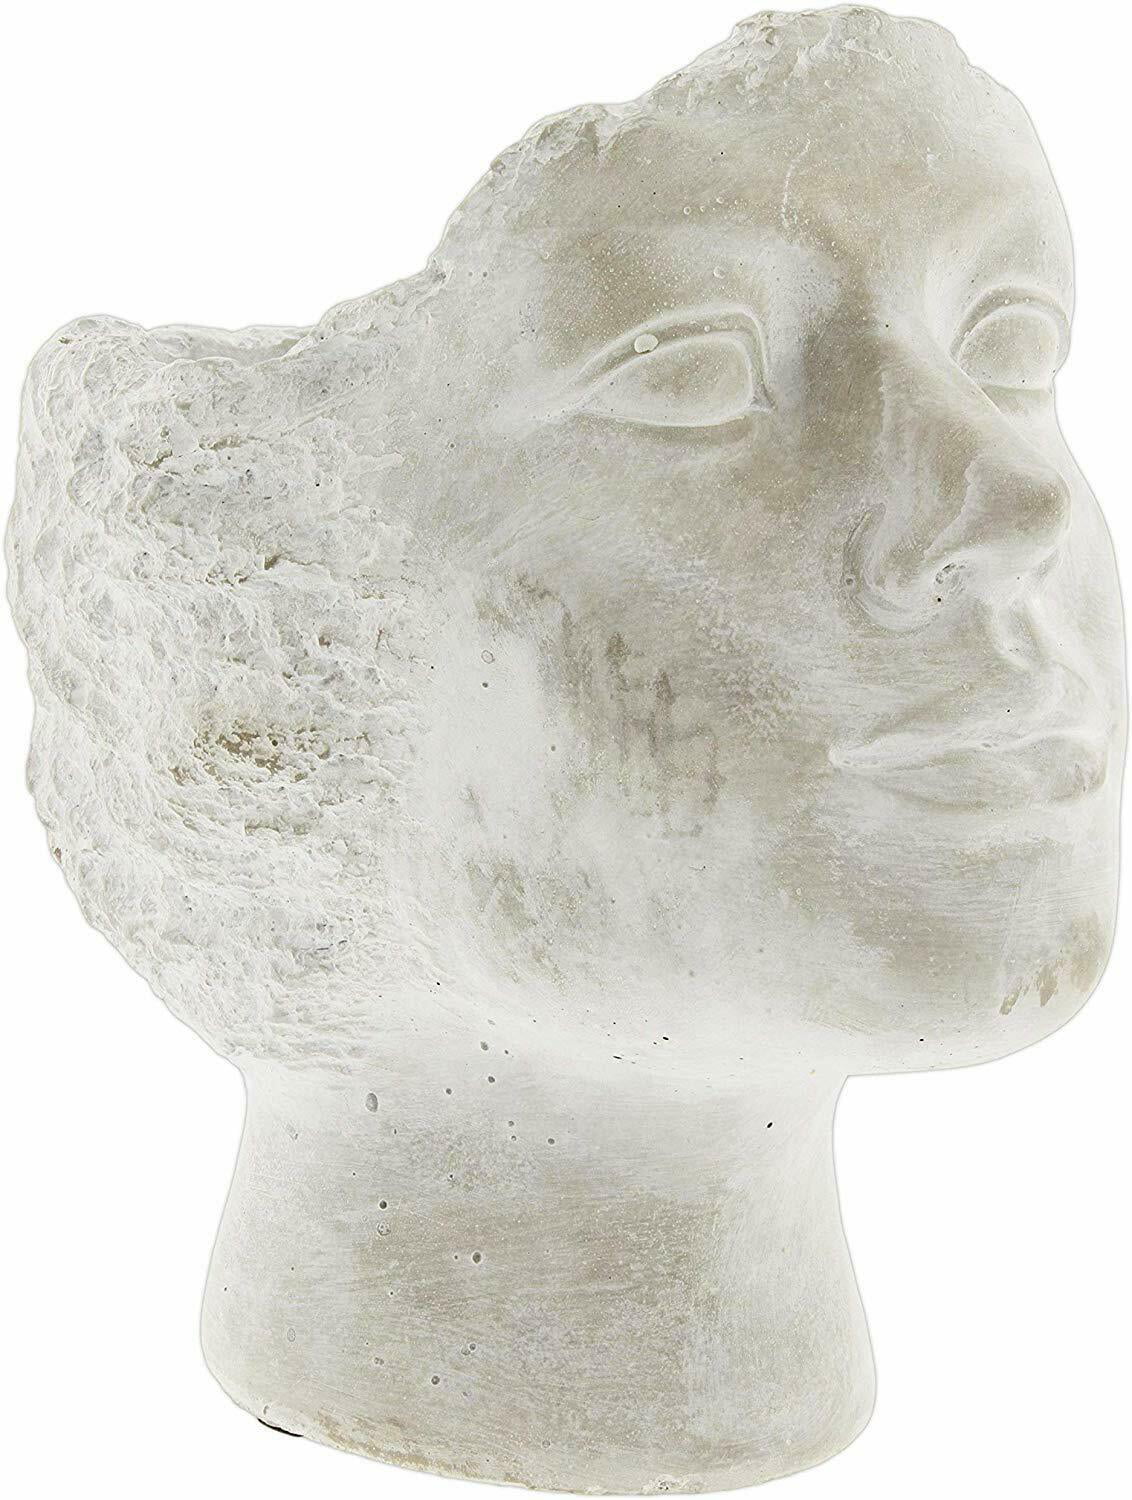 9.5" Tall by Hill's Park Whitewashed Cement Stone Statue Head Planter 